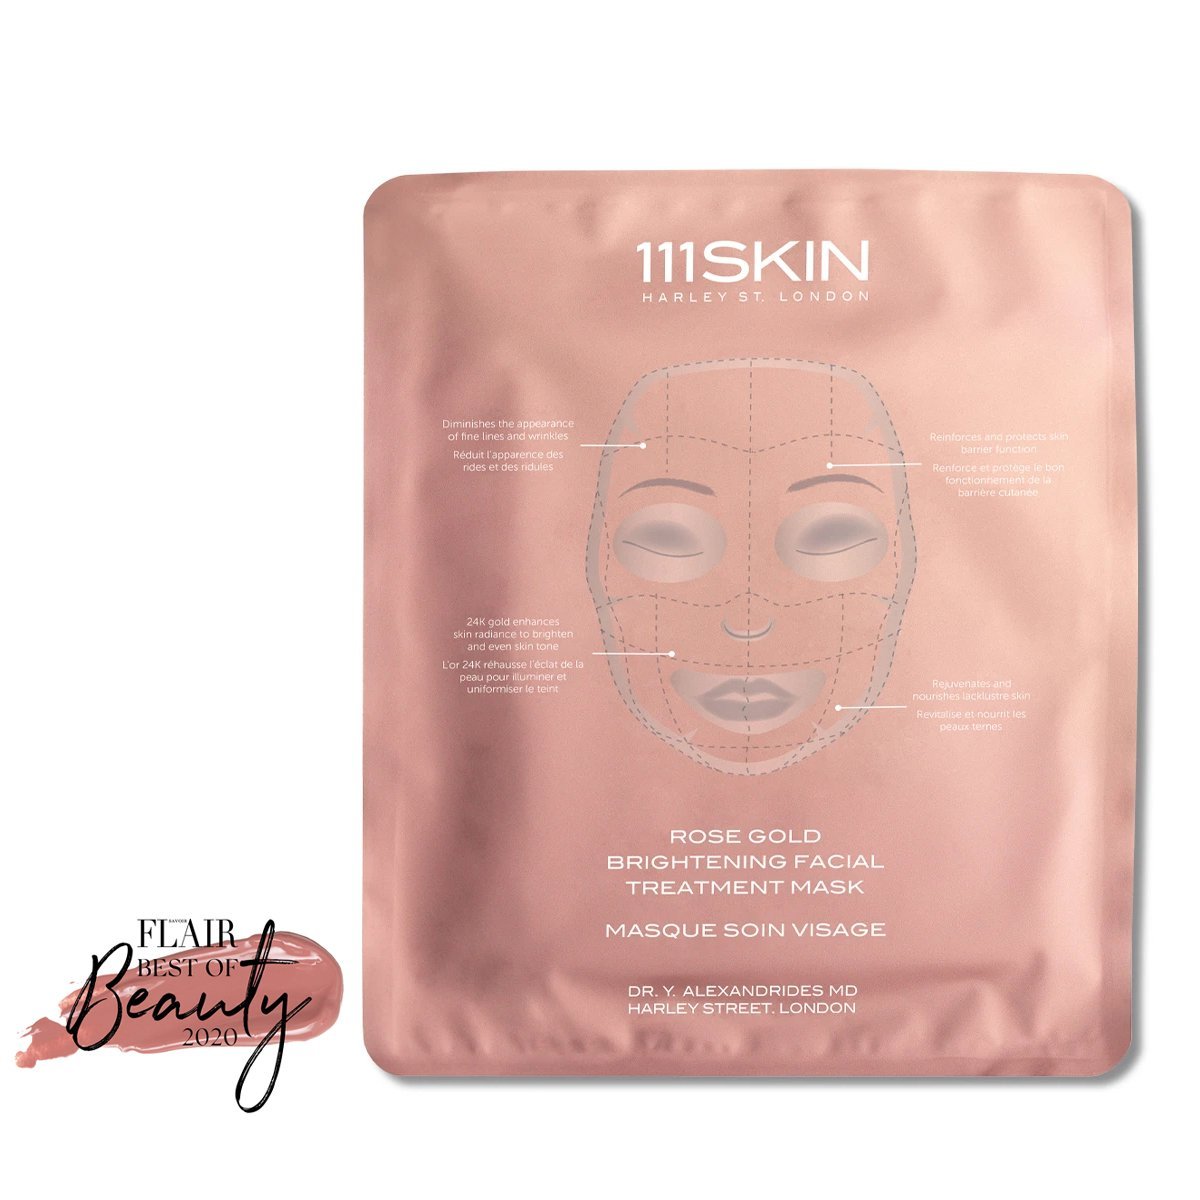 Rose Gold Brightening Facial Treatment Mask BOX (5) - Espace Skins Montreal